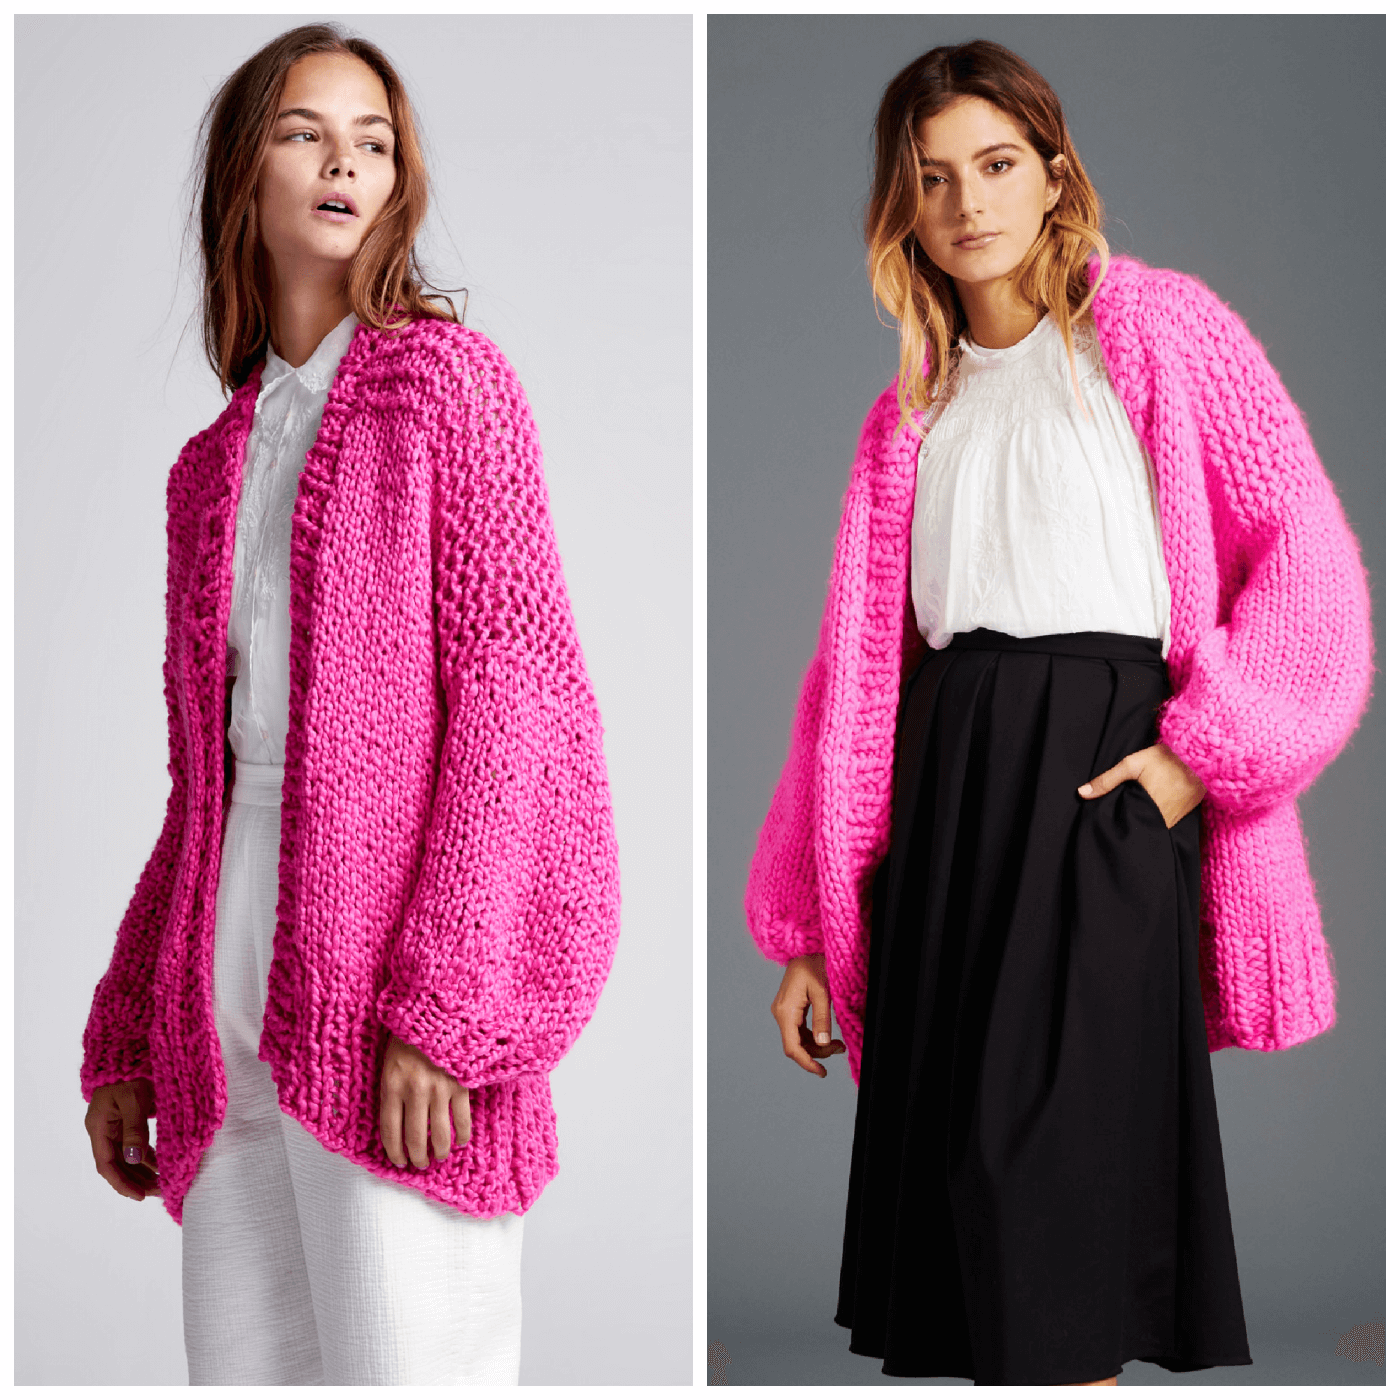 A collage with two photos: On the left, a model wears a bright pink knit cardigan in cotton yarn; on the left, a model wears a bright pink knitted cardigan in merino wool.